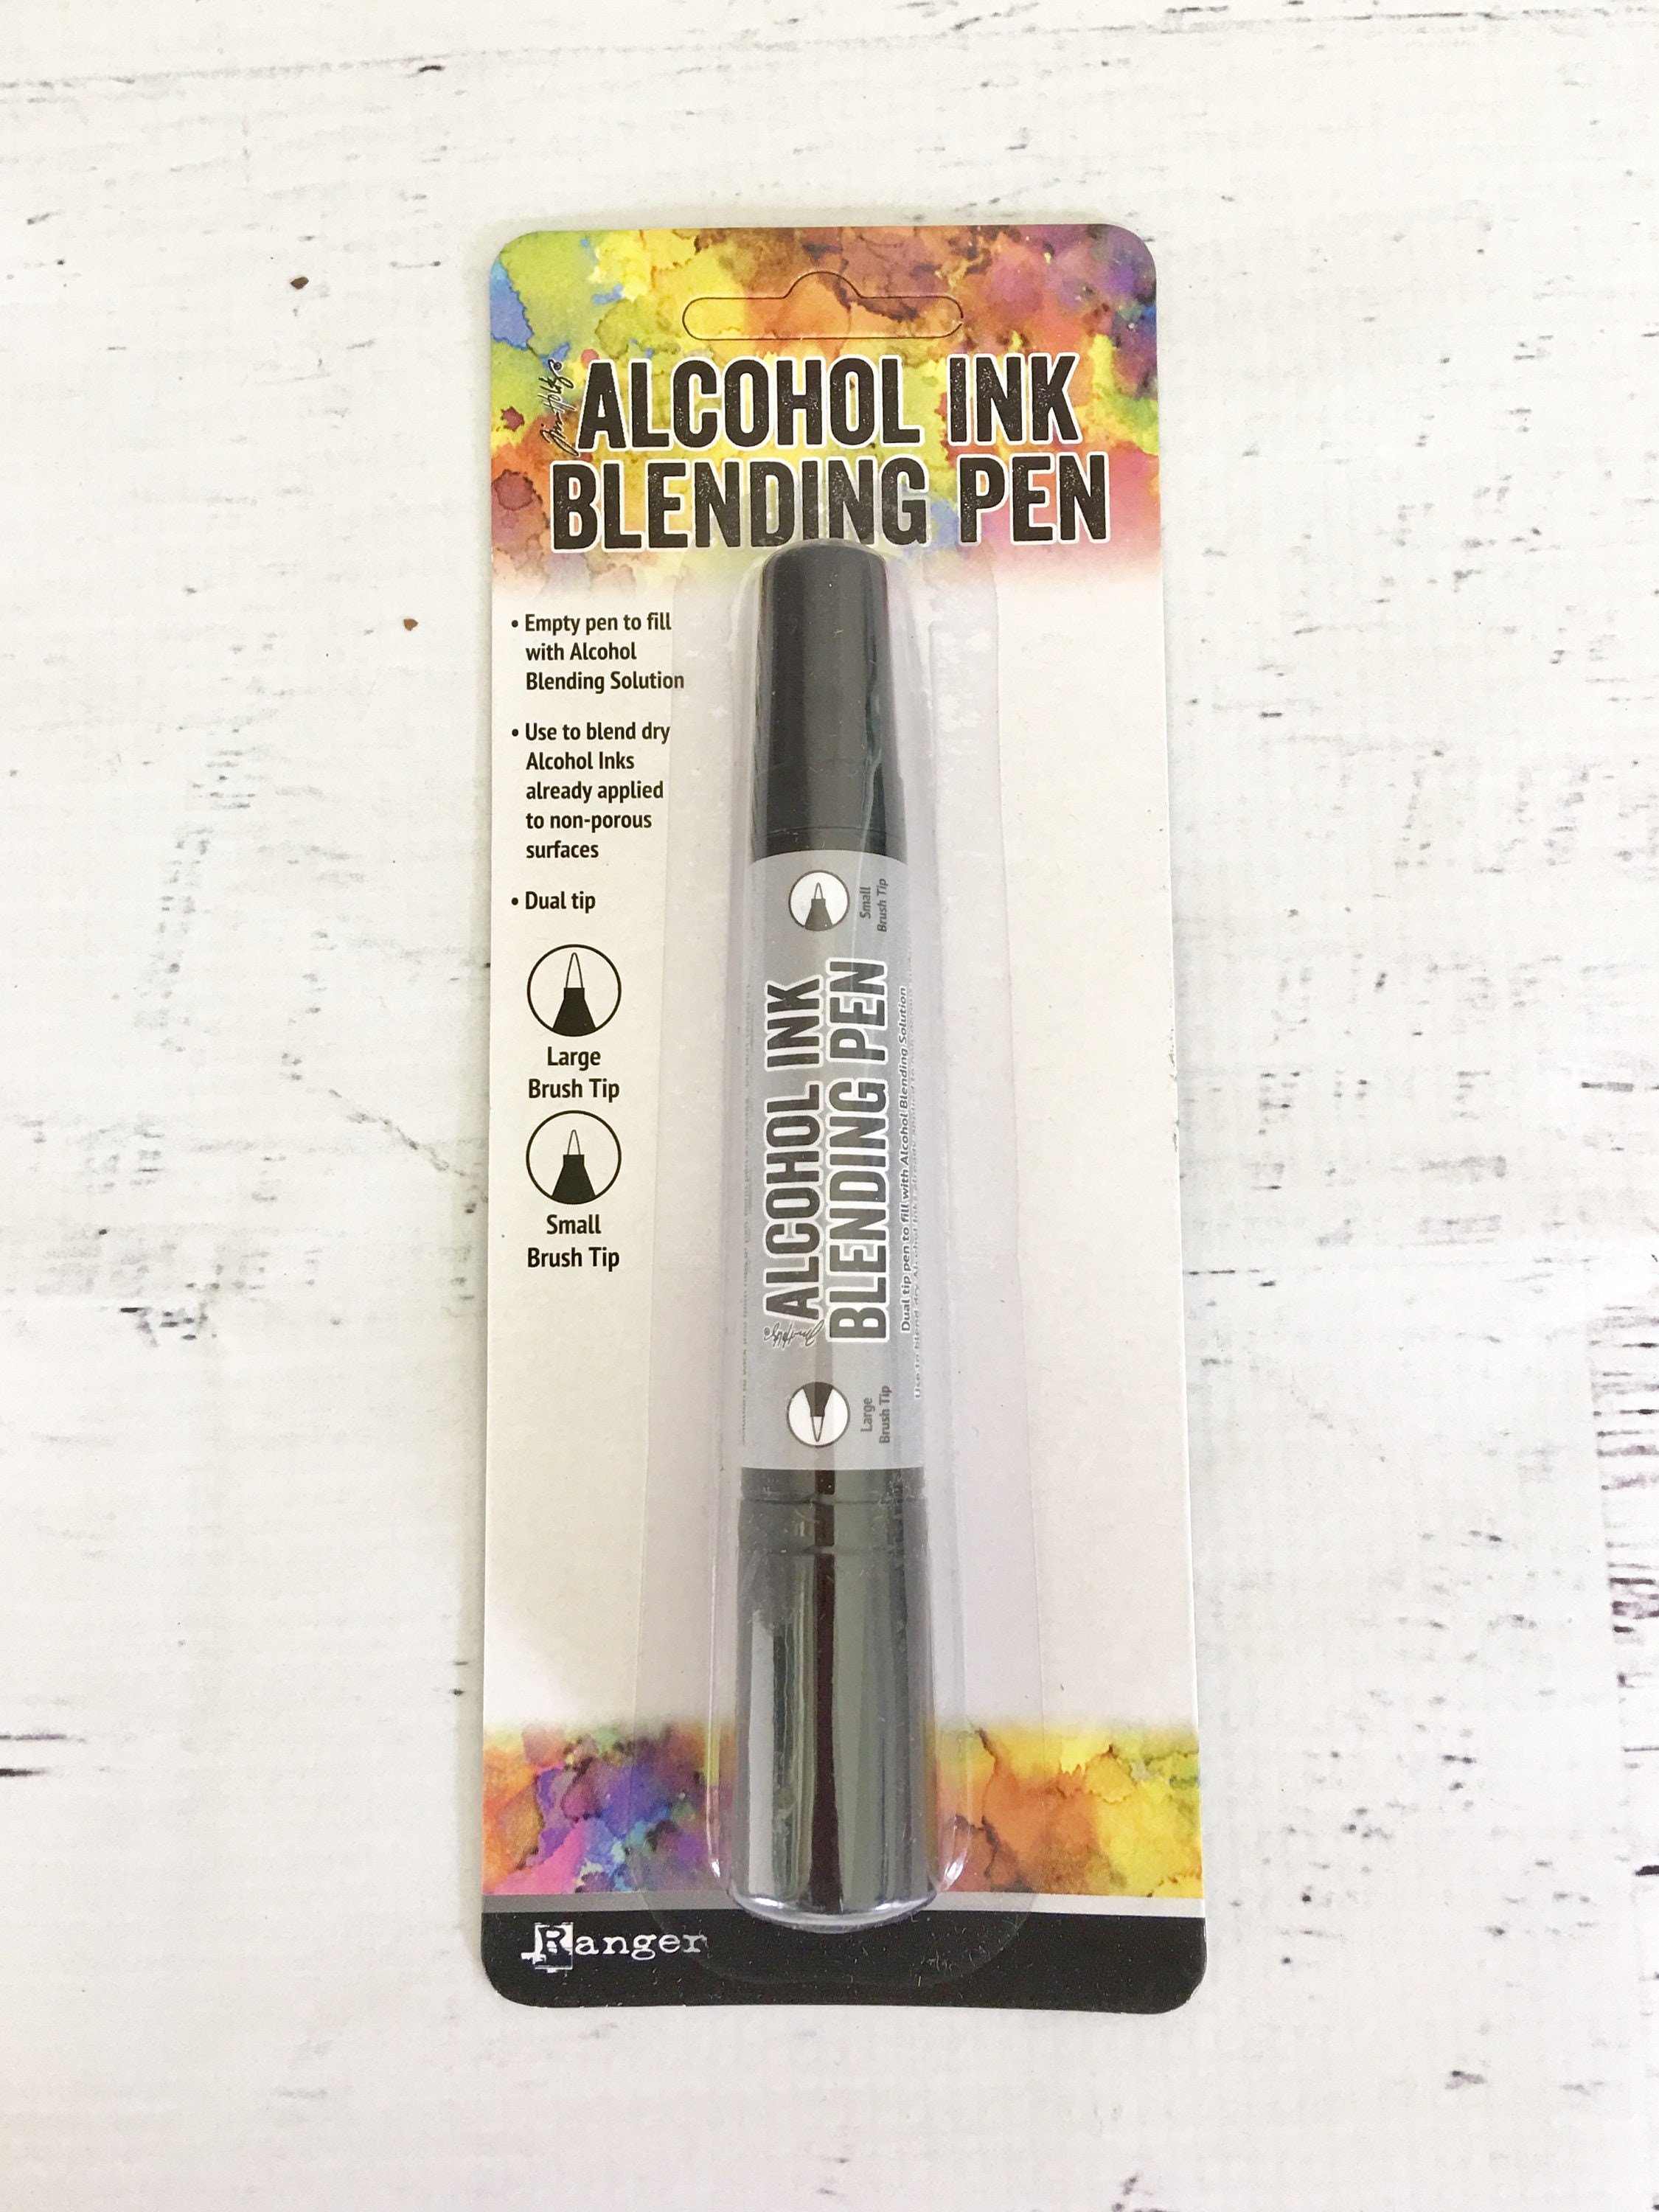 Tim Holtz Ranger Alcohol Ink Blending Pen, Dual Tip-Large & Small, For Mixed Media, Paper Crafting, Card Making, Scrapbooking, Refillable